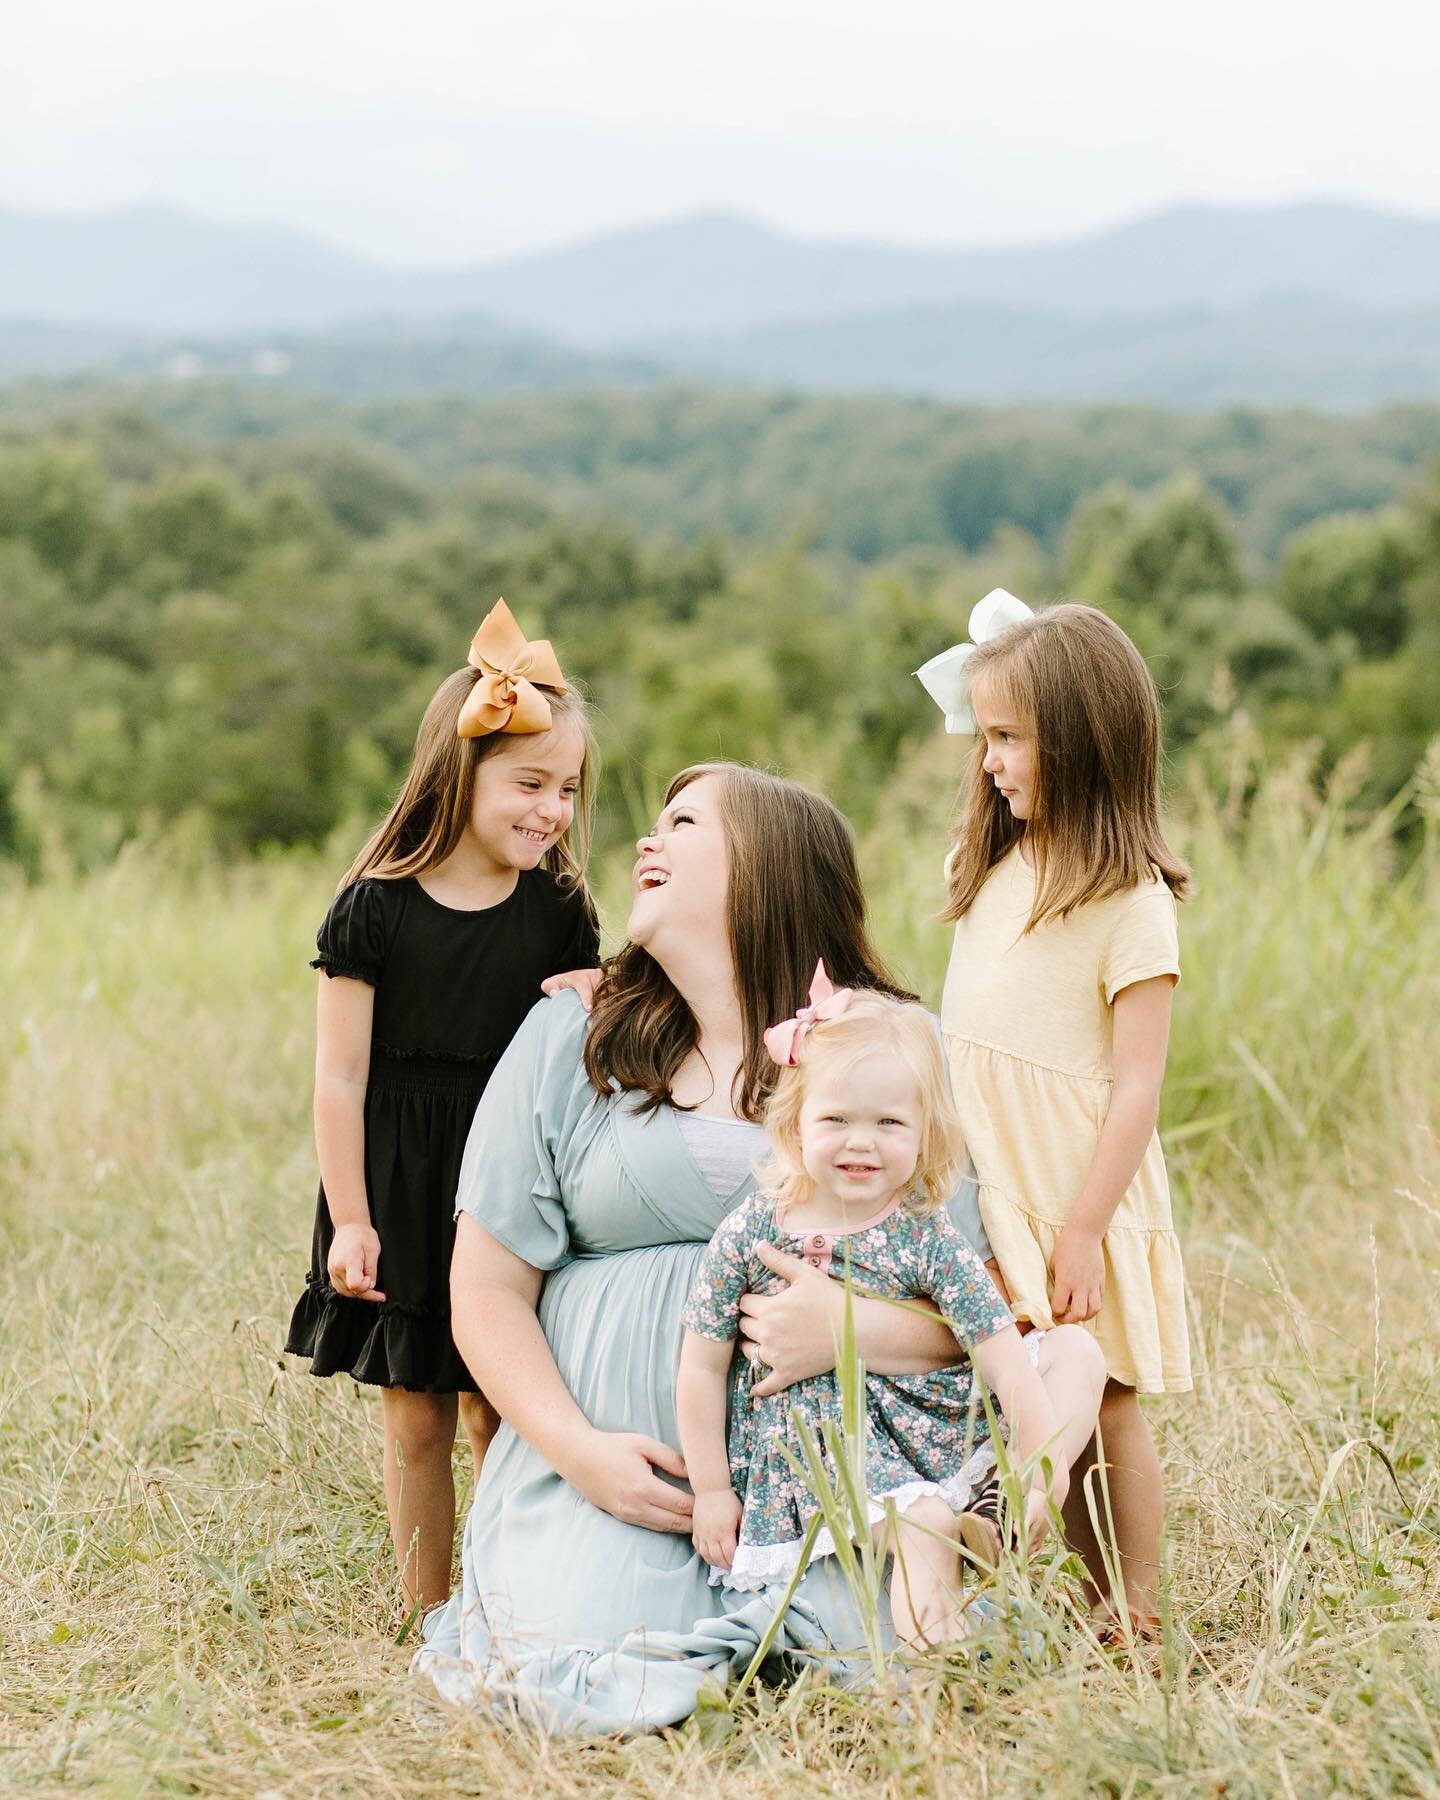 Love photographing mamas with their babies- it just never gets old. 🥰